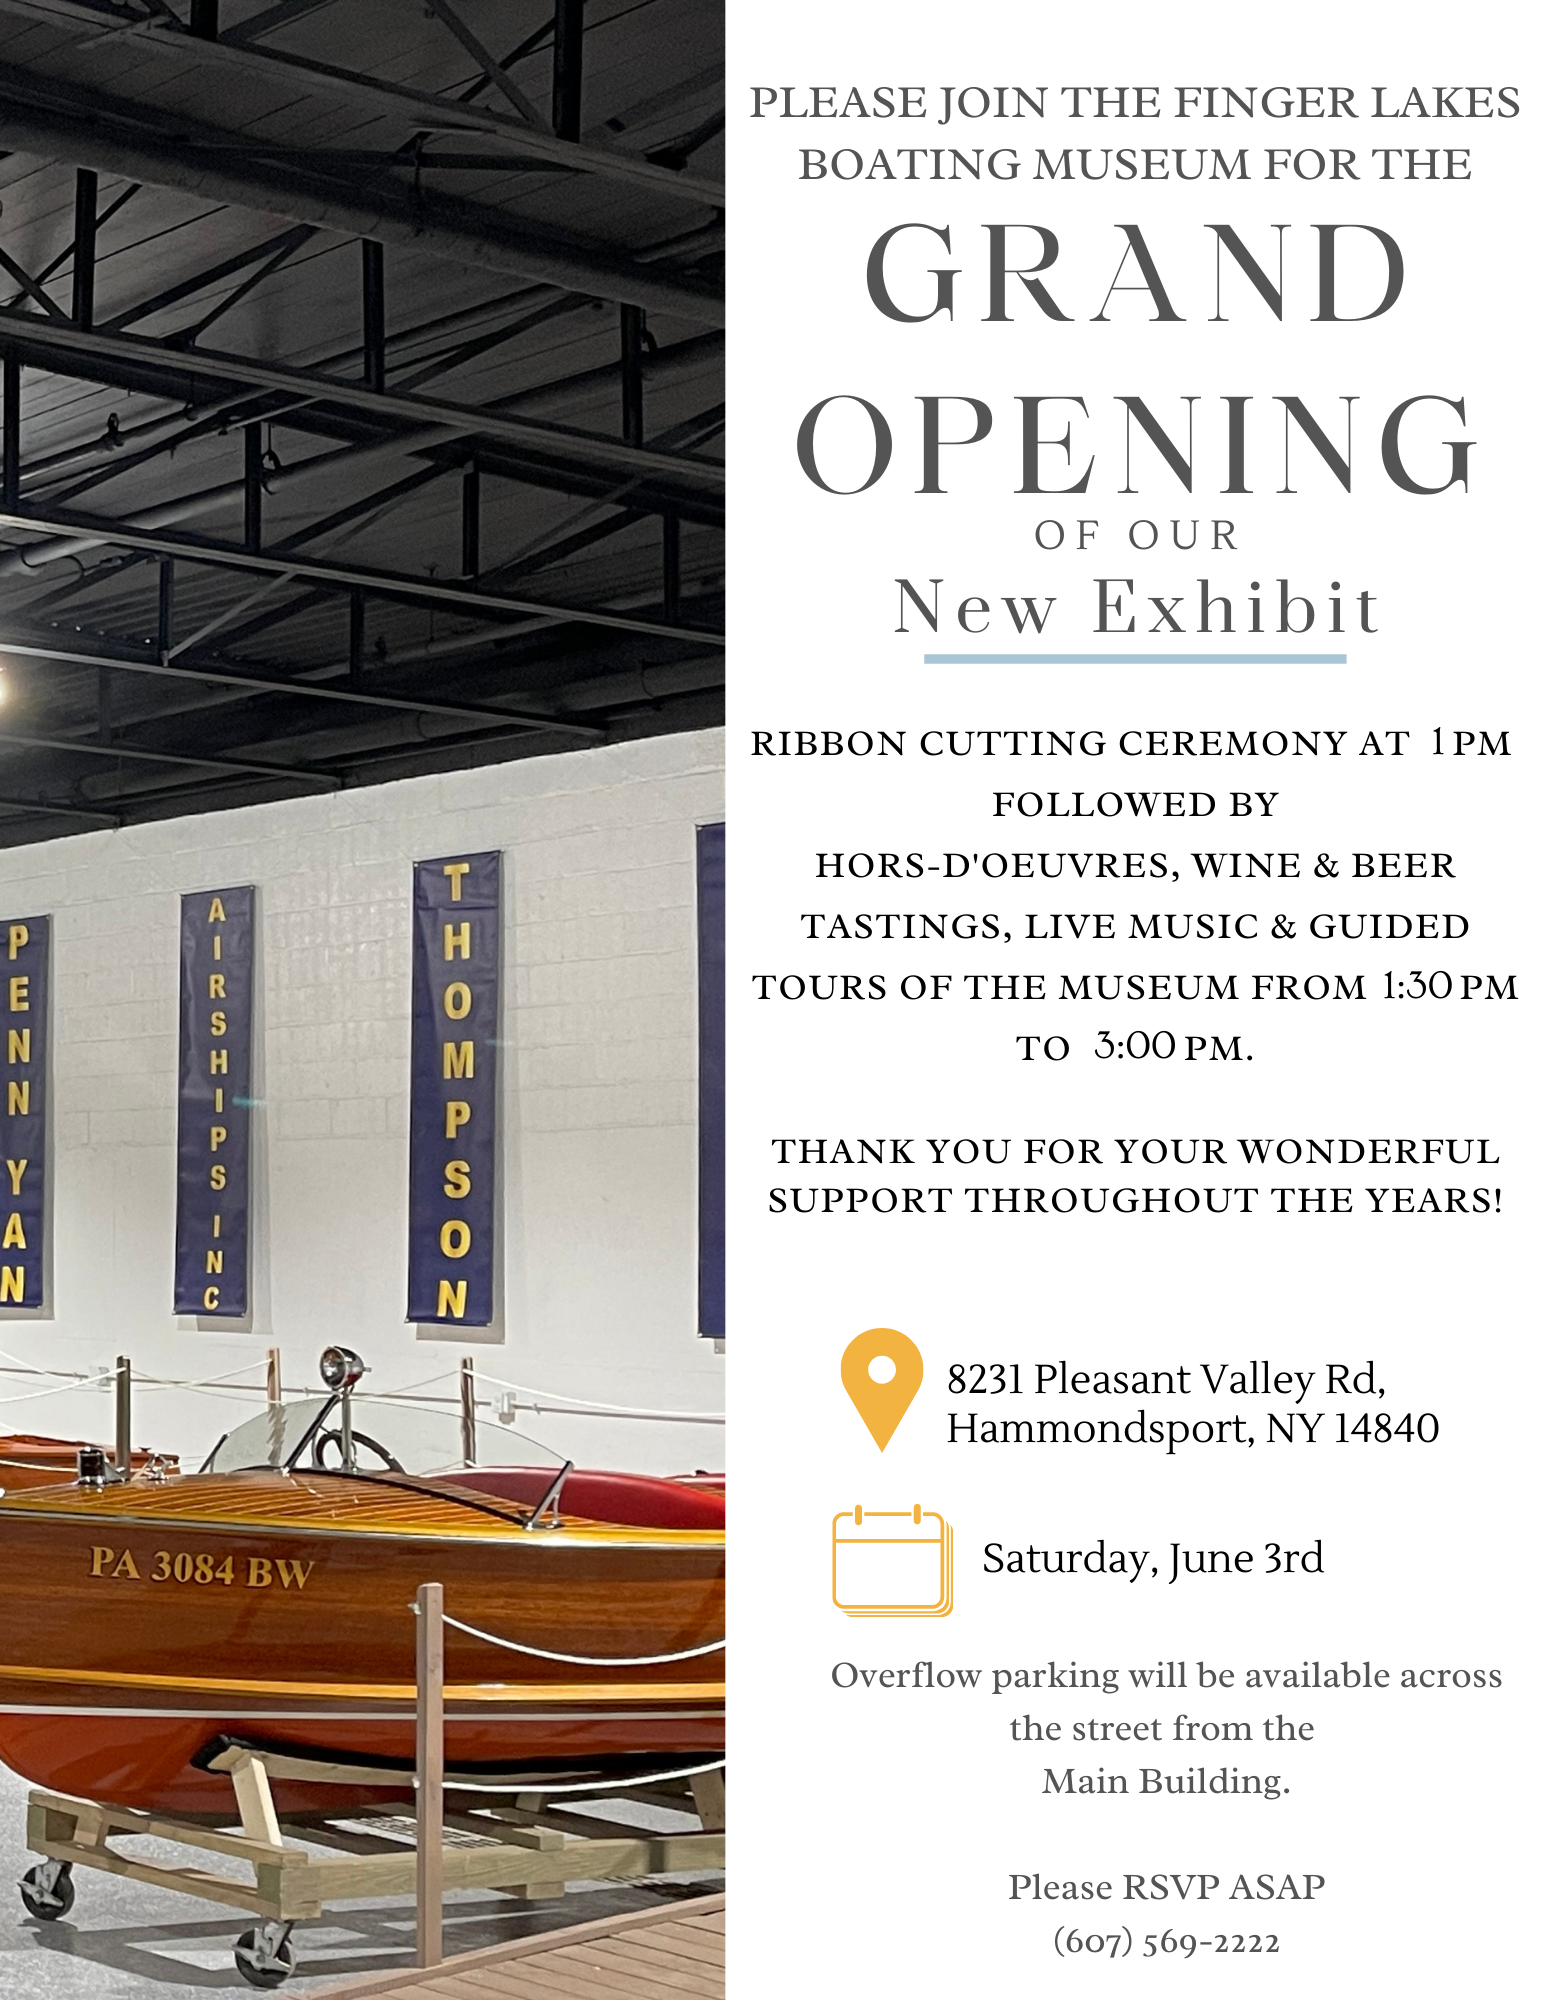 Boating Museum Grand Opening of New Exhibit